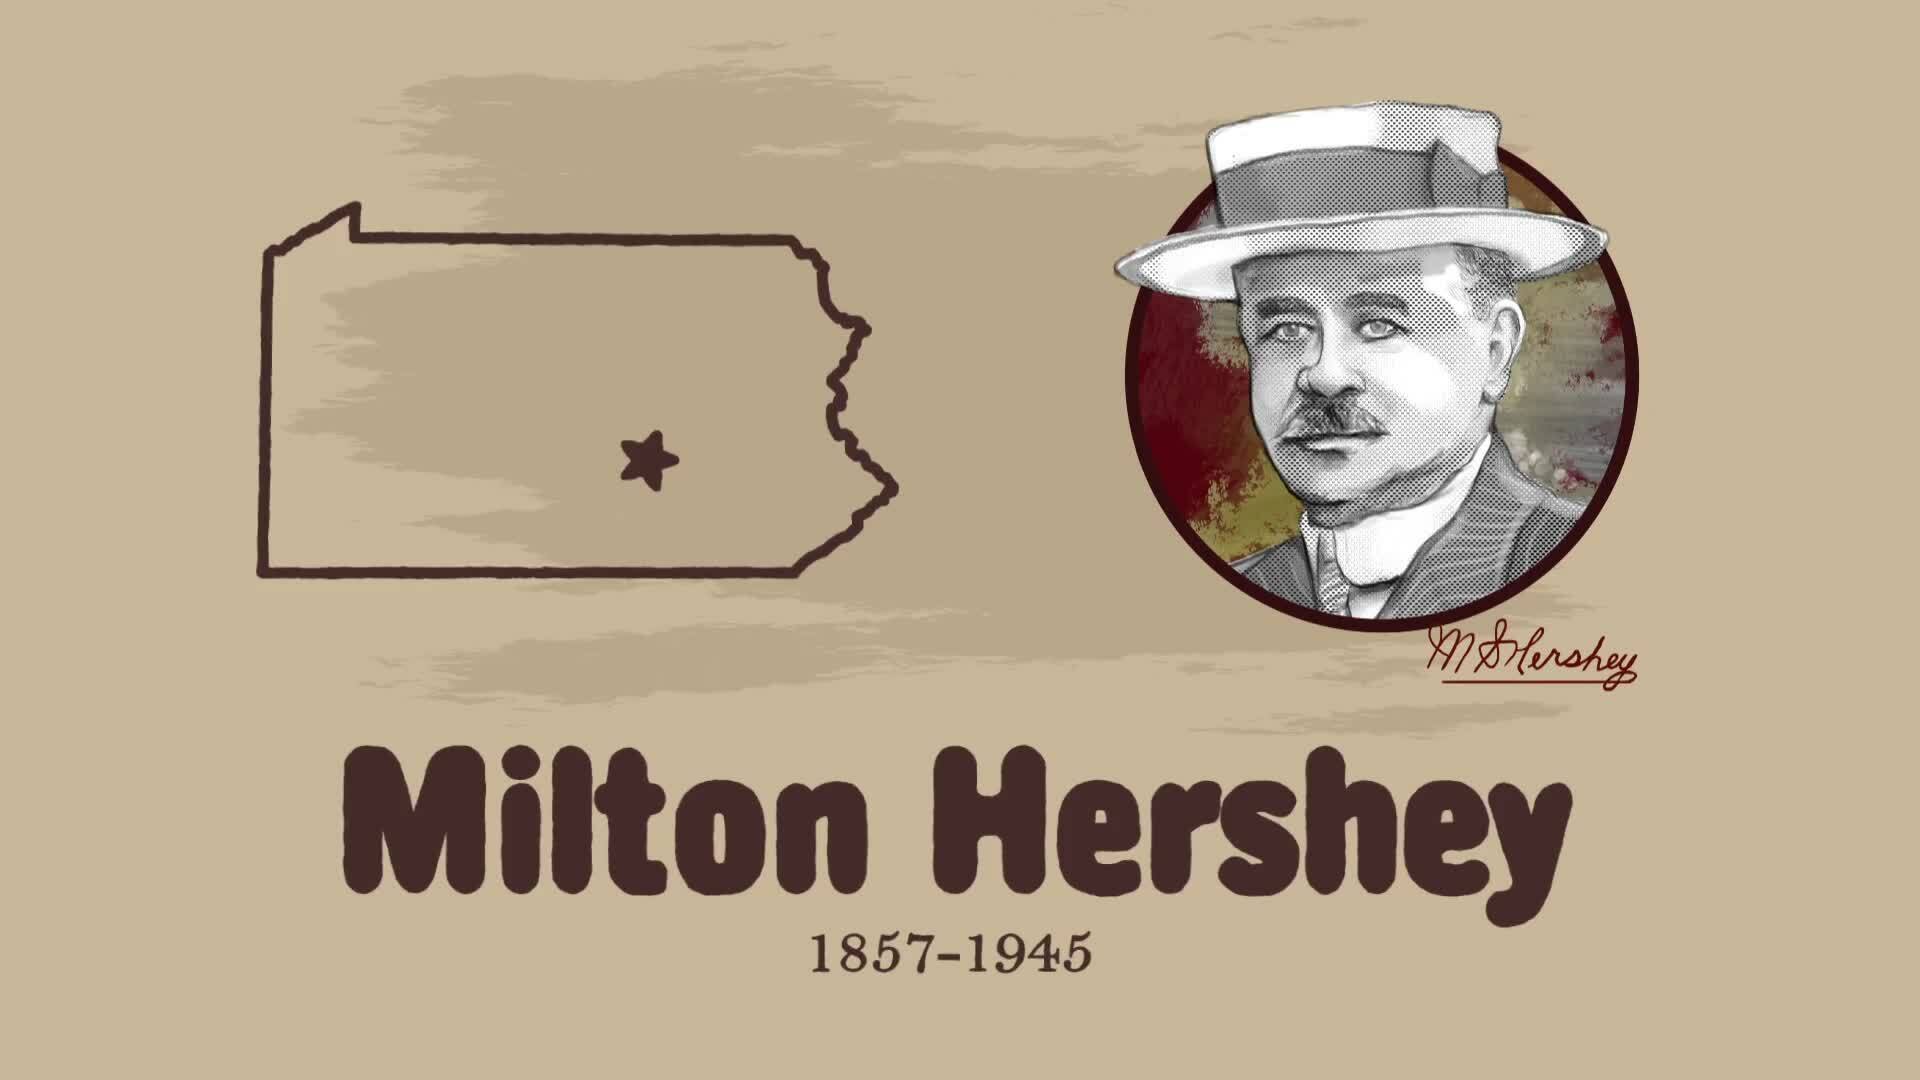 Specialization and Milton Hershey